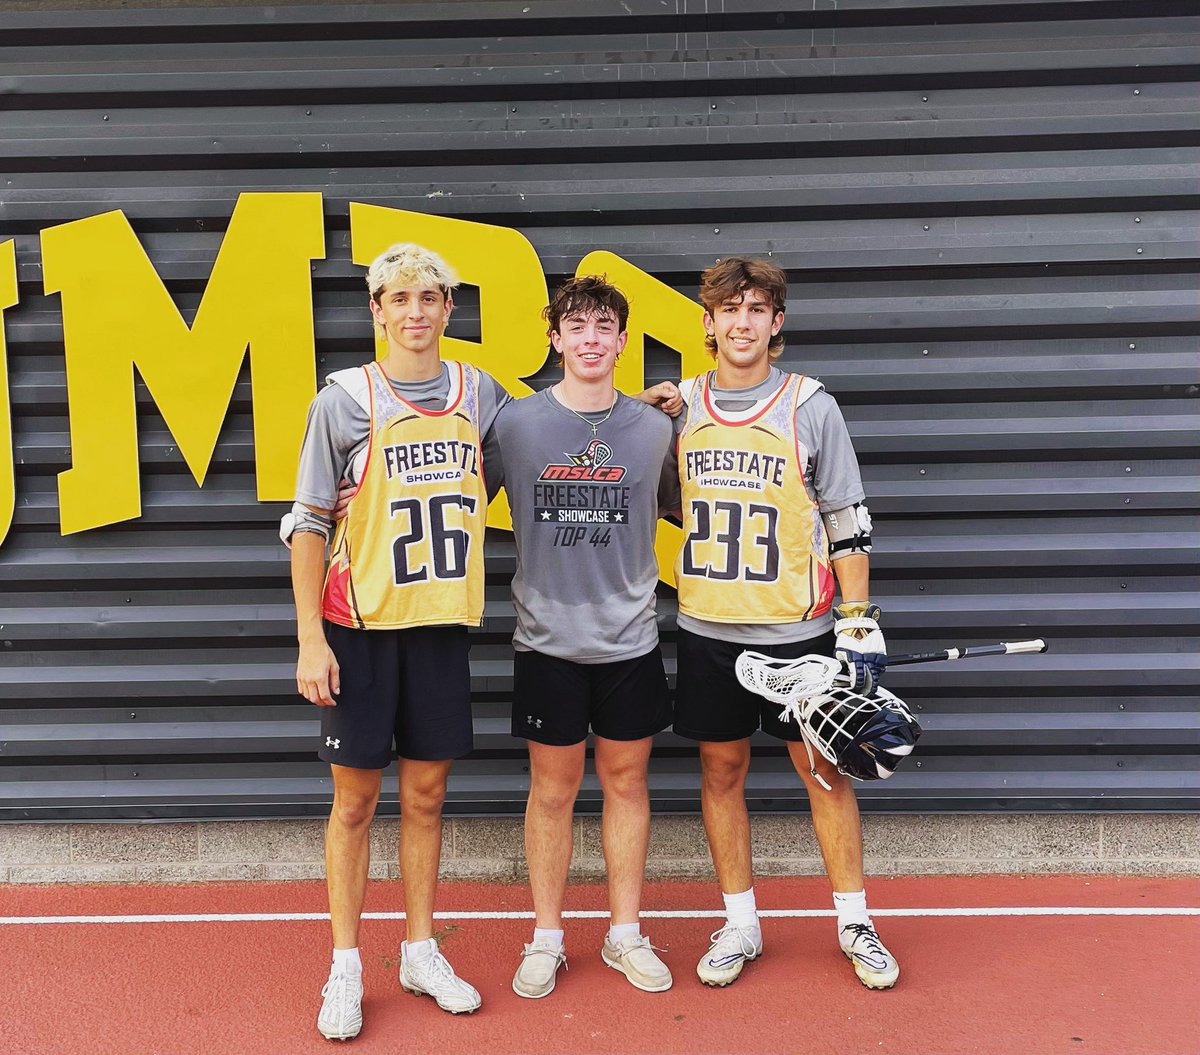 @MSLCAinfo Top 44 games this evening  @UMBCAthletics . From left to right, Noah Gies 24’, Drew Wolven 25’ and Luke Georgelakos 24’. Future is bright! #FalconFamily